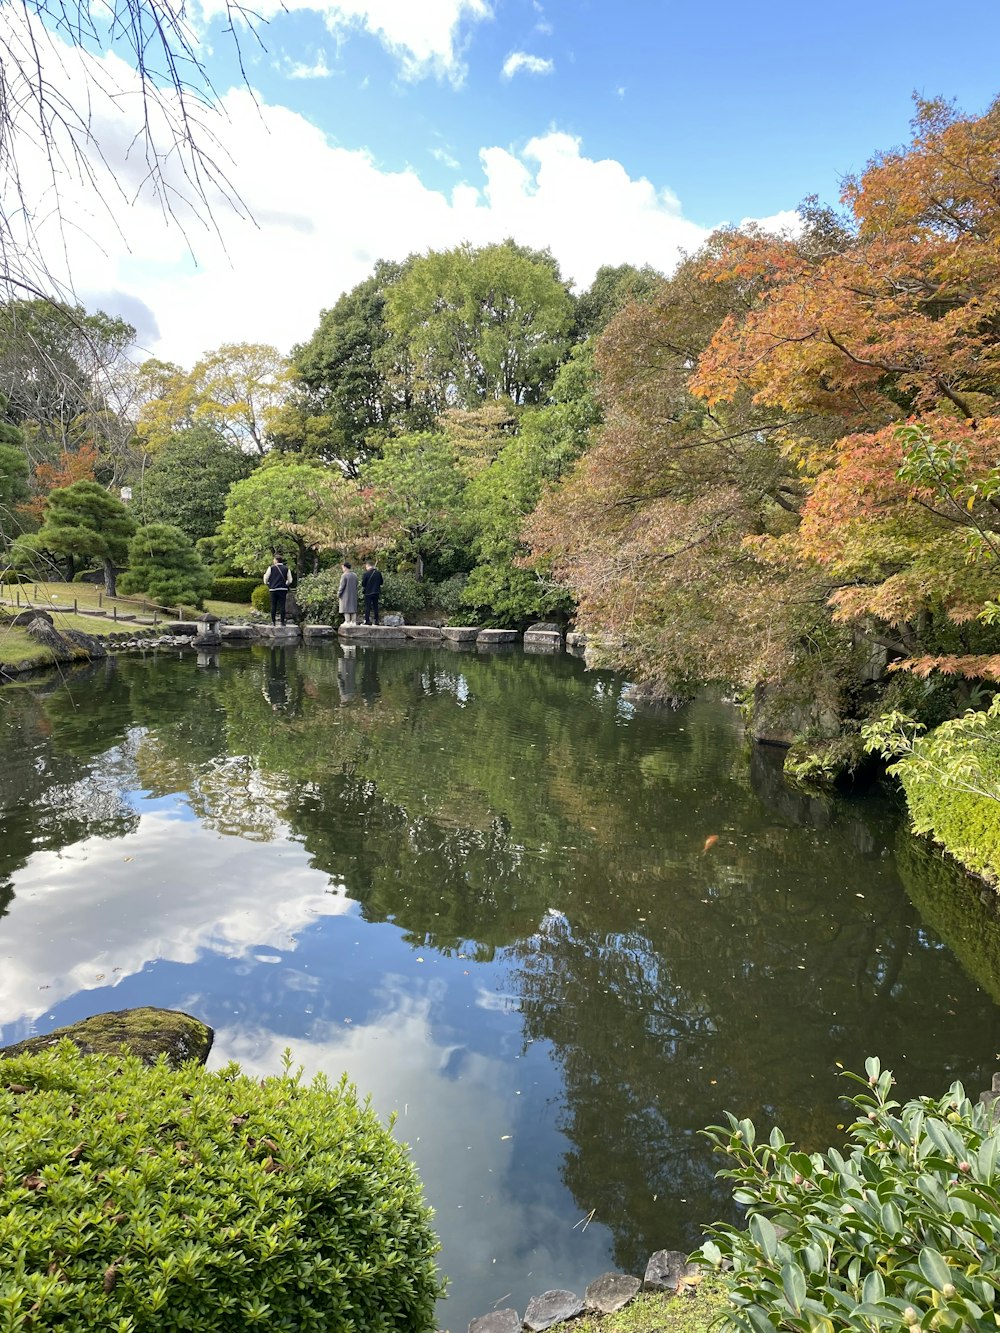 a pond surrounded by lush green trees in a park